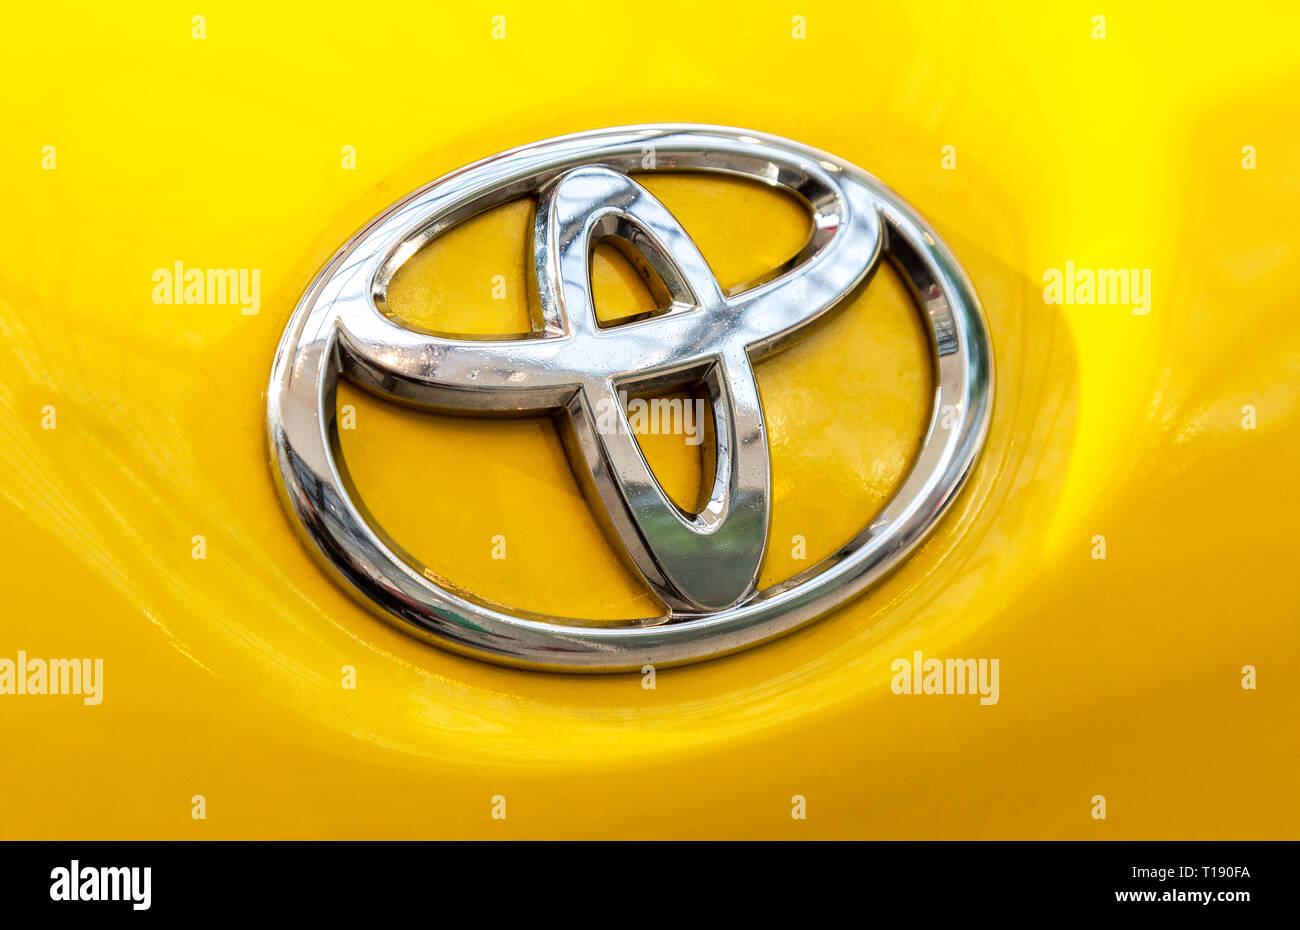 Samara, Russia - March 23, 2019: Toyota logo on the car. Toyota Motor Corporation is a Japanese automotive manufacturer Stock Photo